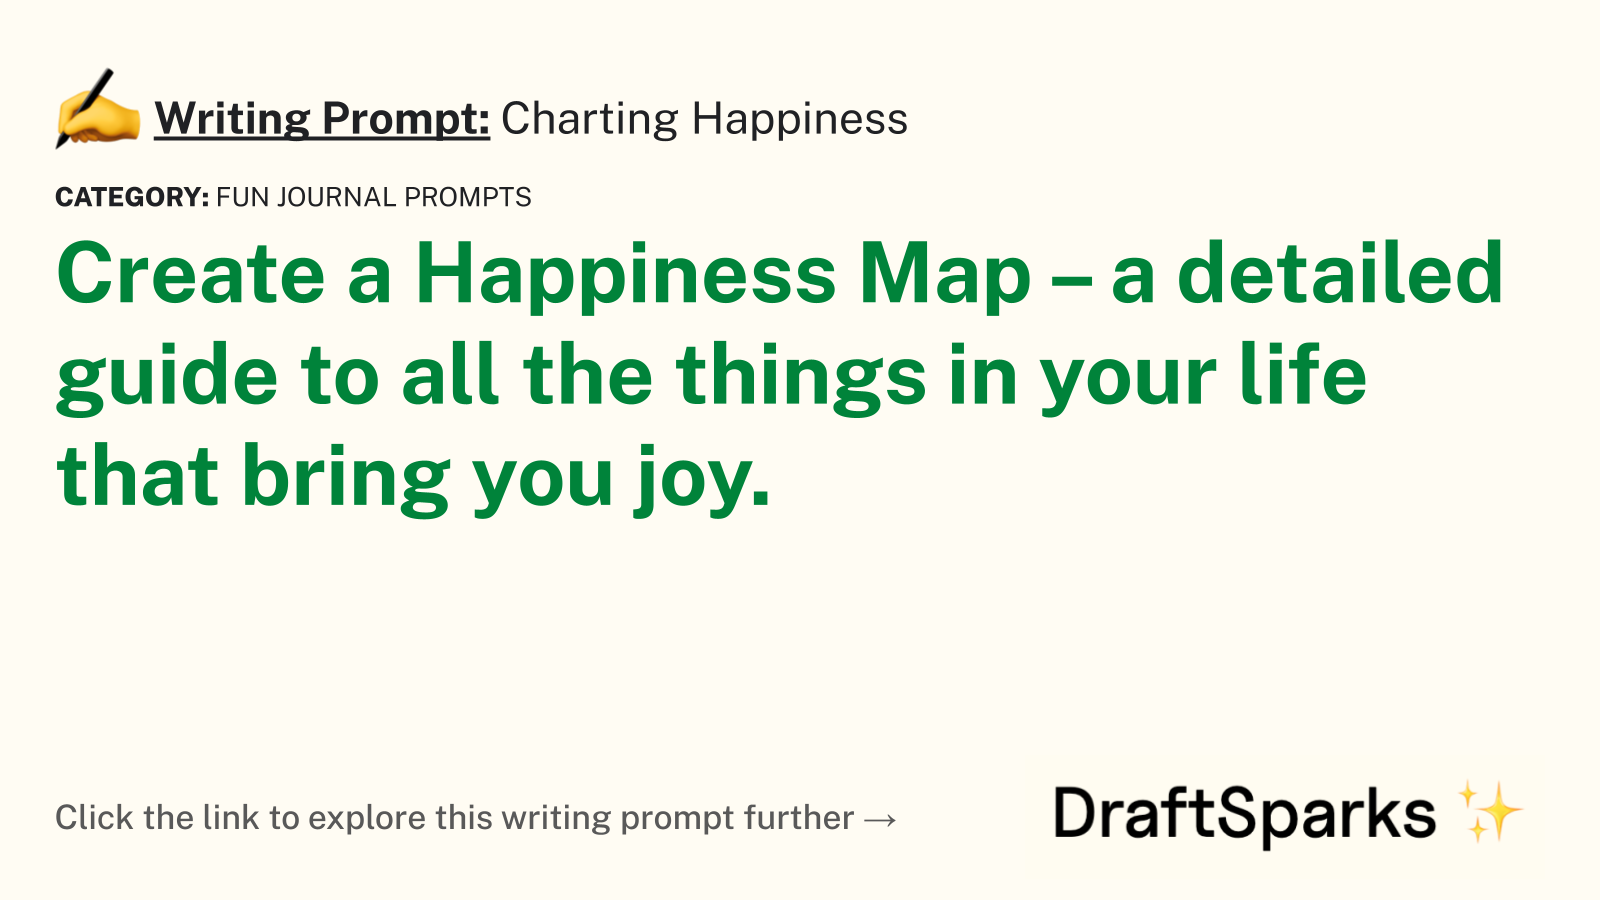 Charting Happiness